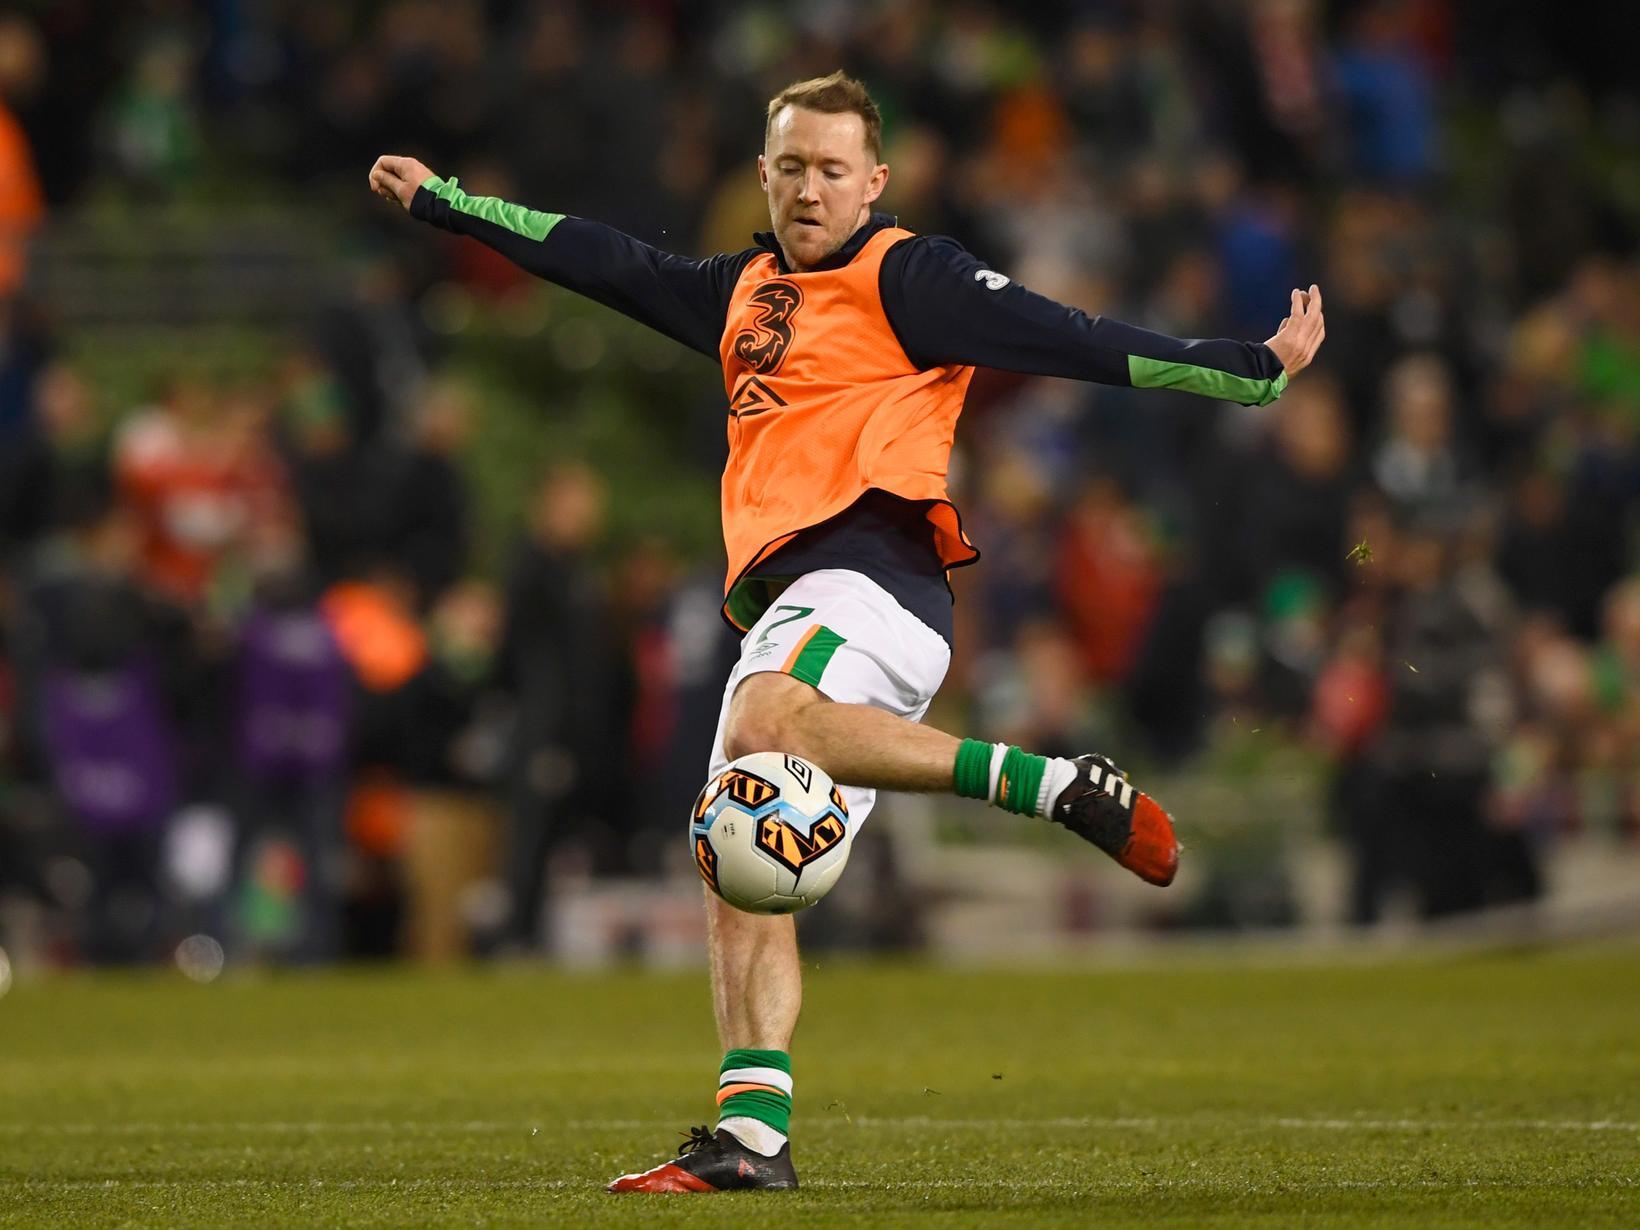 Ex-Celtic star Aiden McGeady has revealed that he'd be open to staying with Chalrton Athletic beyond his loan spell. His Sunderland contract expires in 2021. (Sunderland Echo)